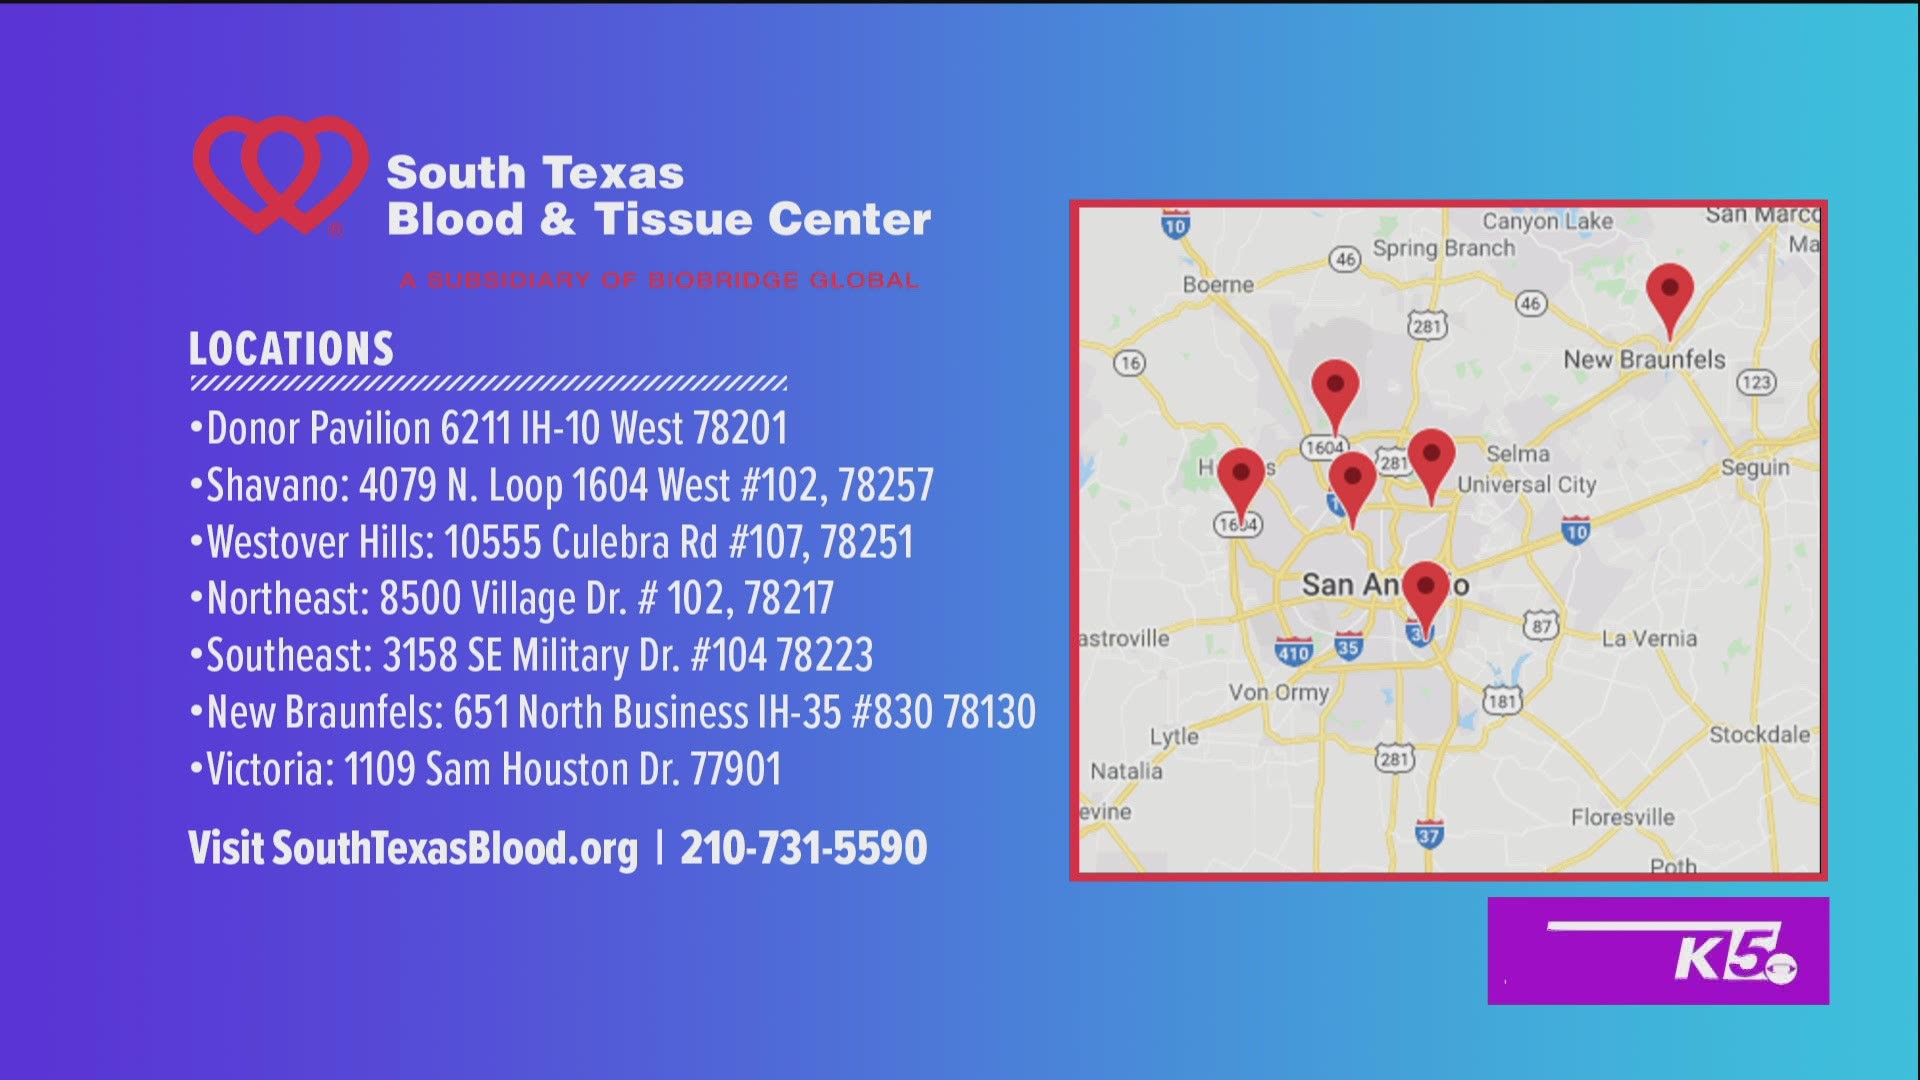 South Texas Blood & Tissue Center needs your donation this holiday season.